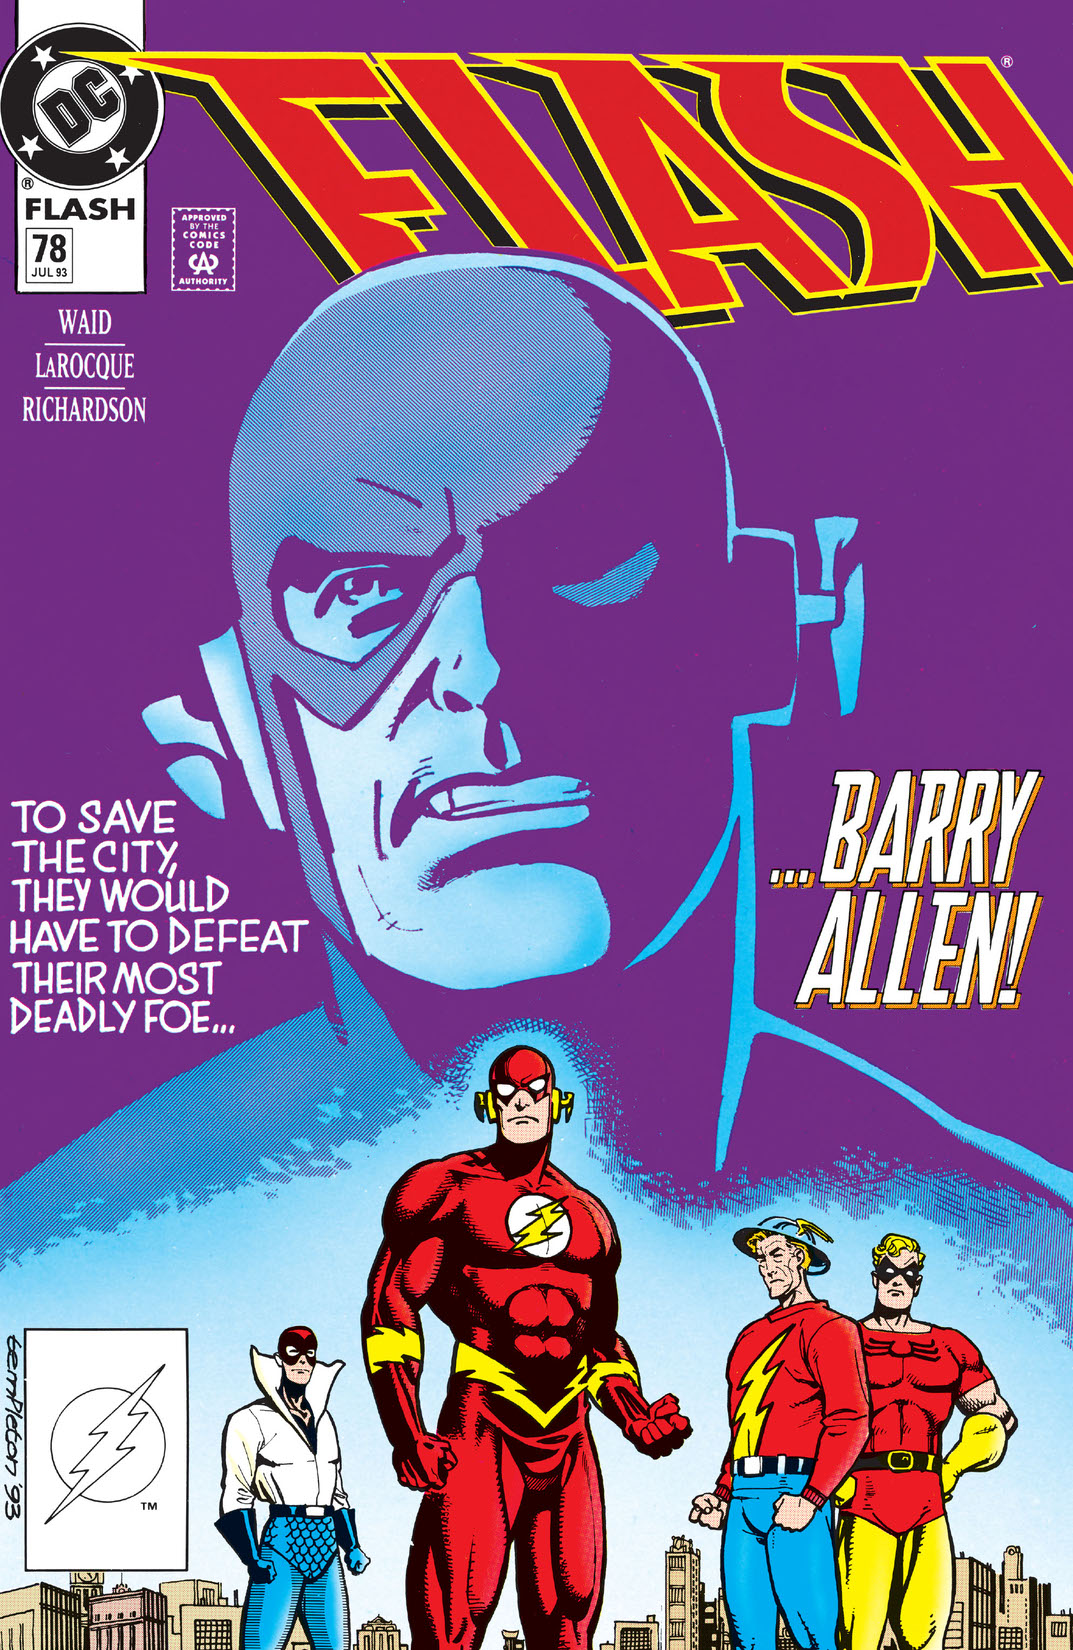 The Flash (1987-) #78 preview images